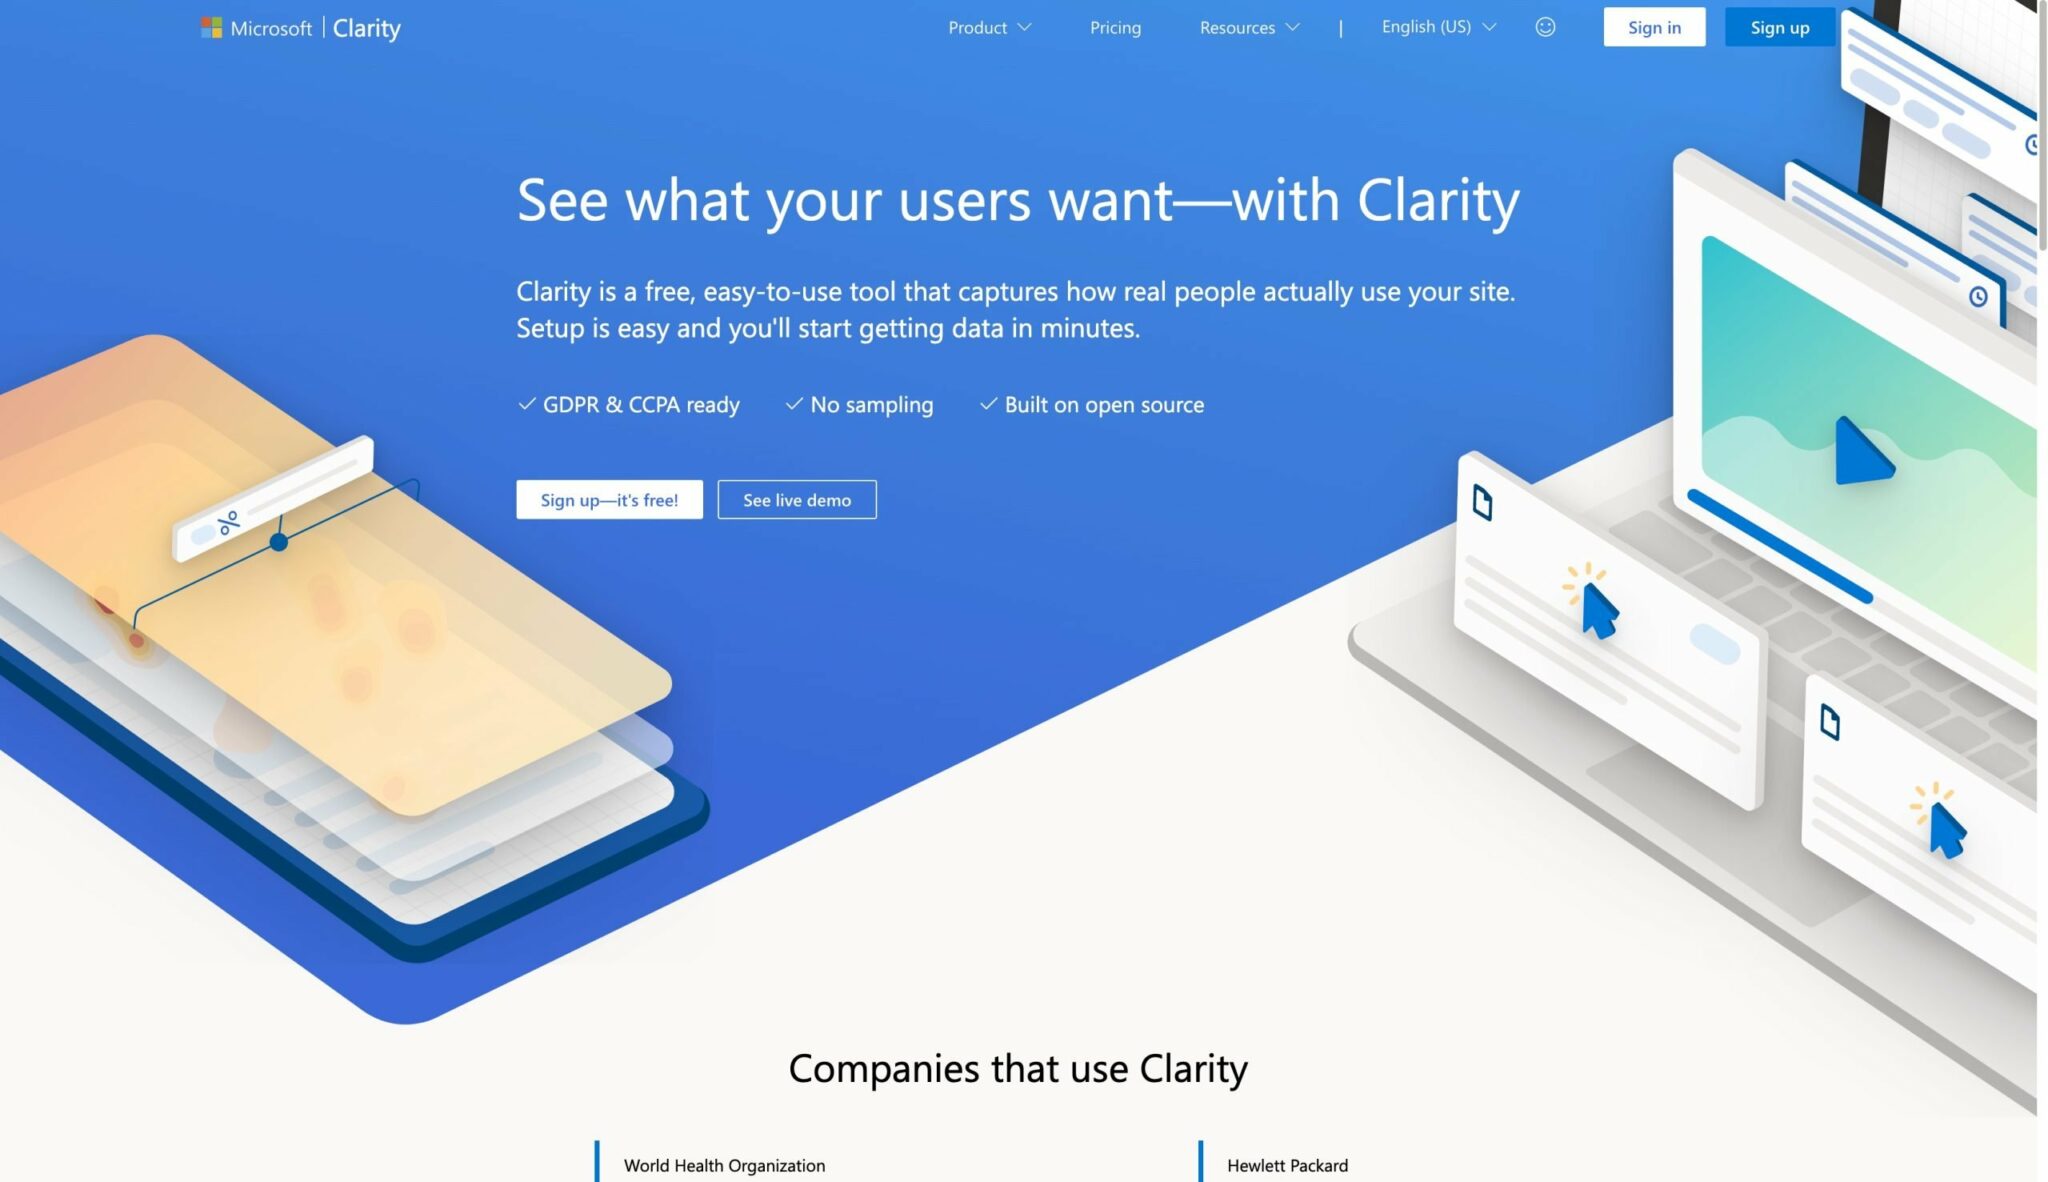 What is Microsoft Clarity? (& How Can It Improve SEO?)